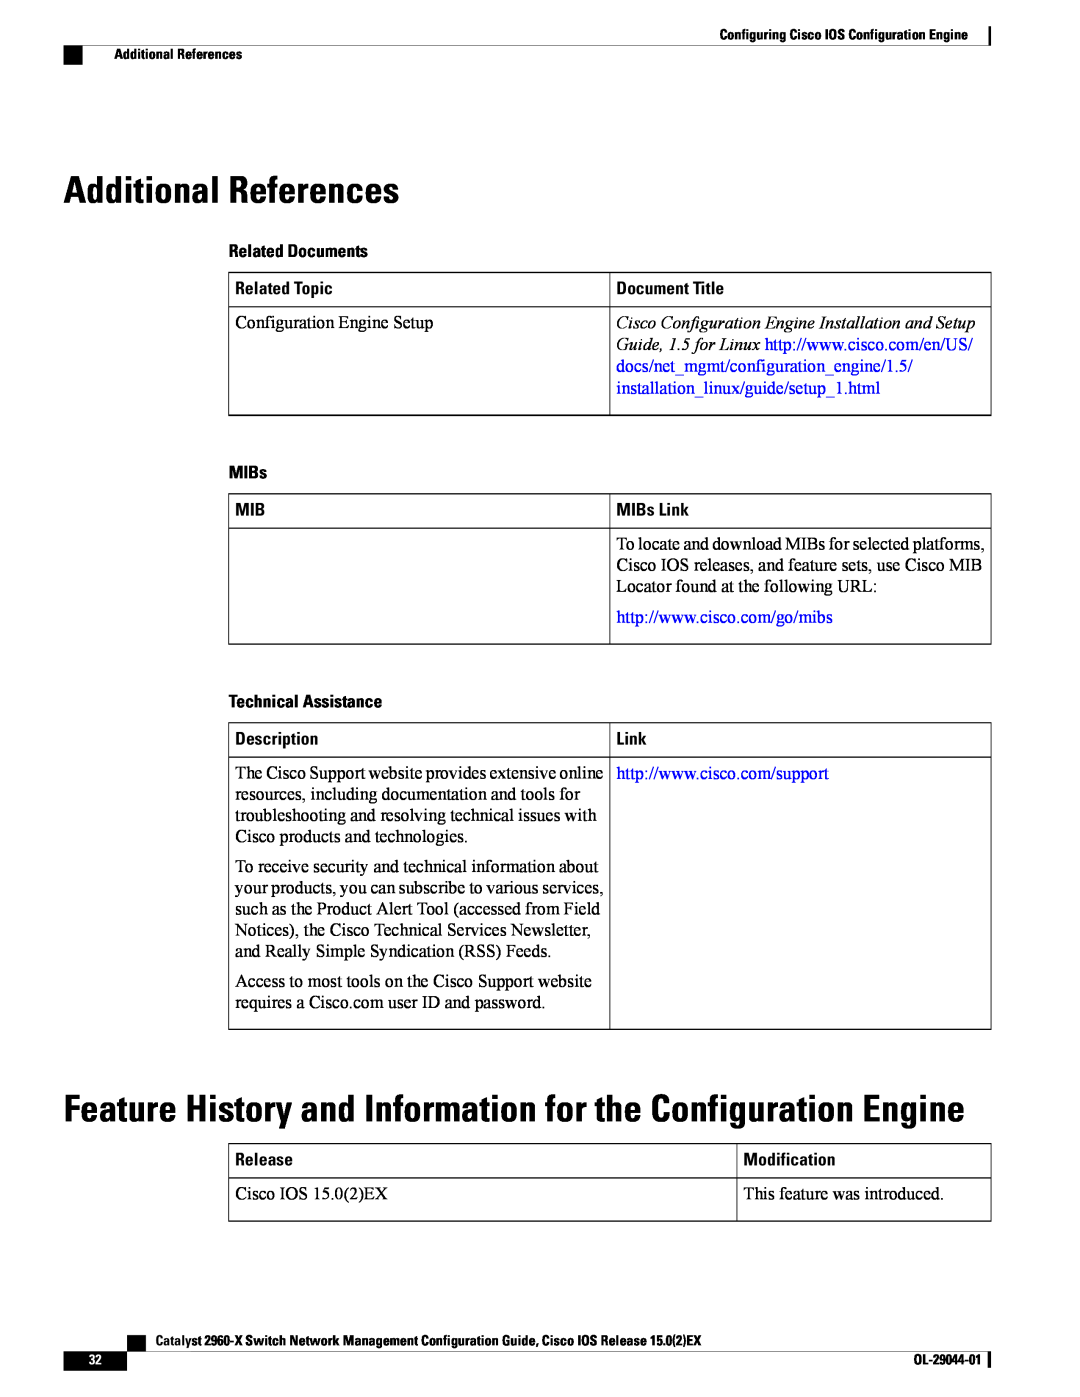 Cisco Systems WSC2960X24PSL Additional References, Feature History and Information for the Configuration Engine, Link 